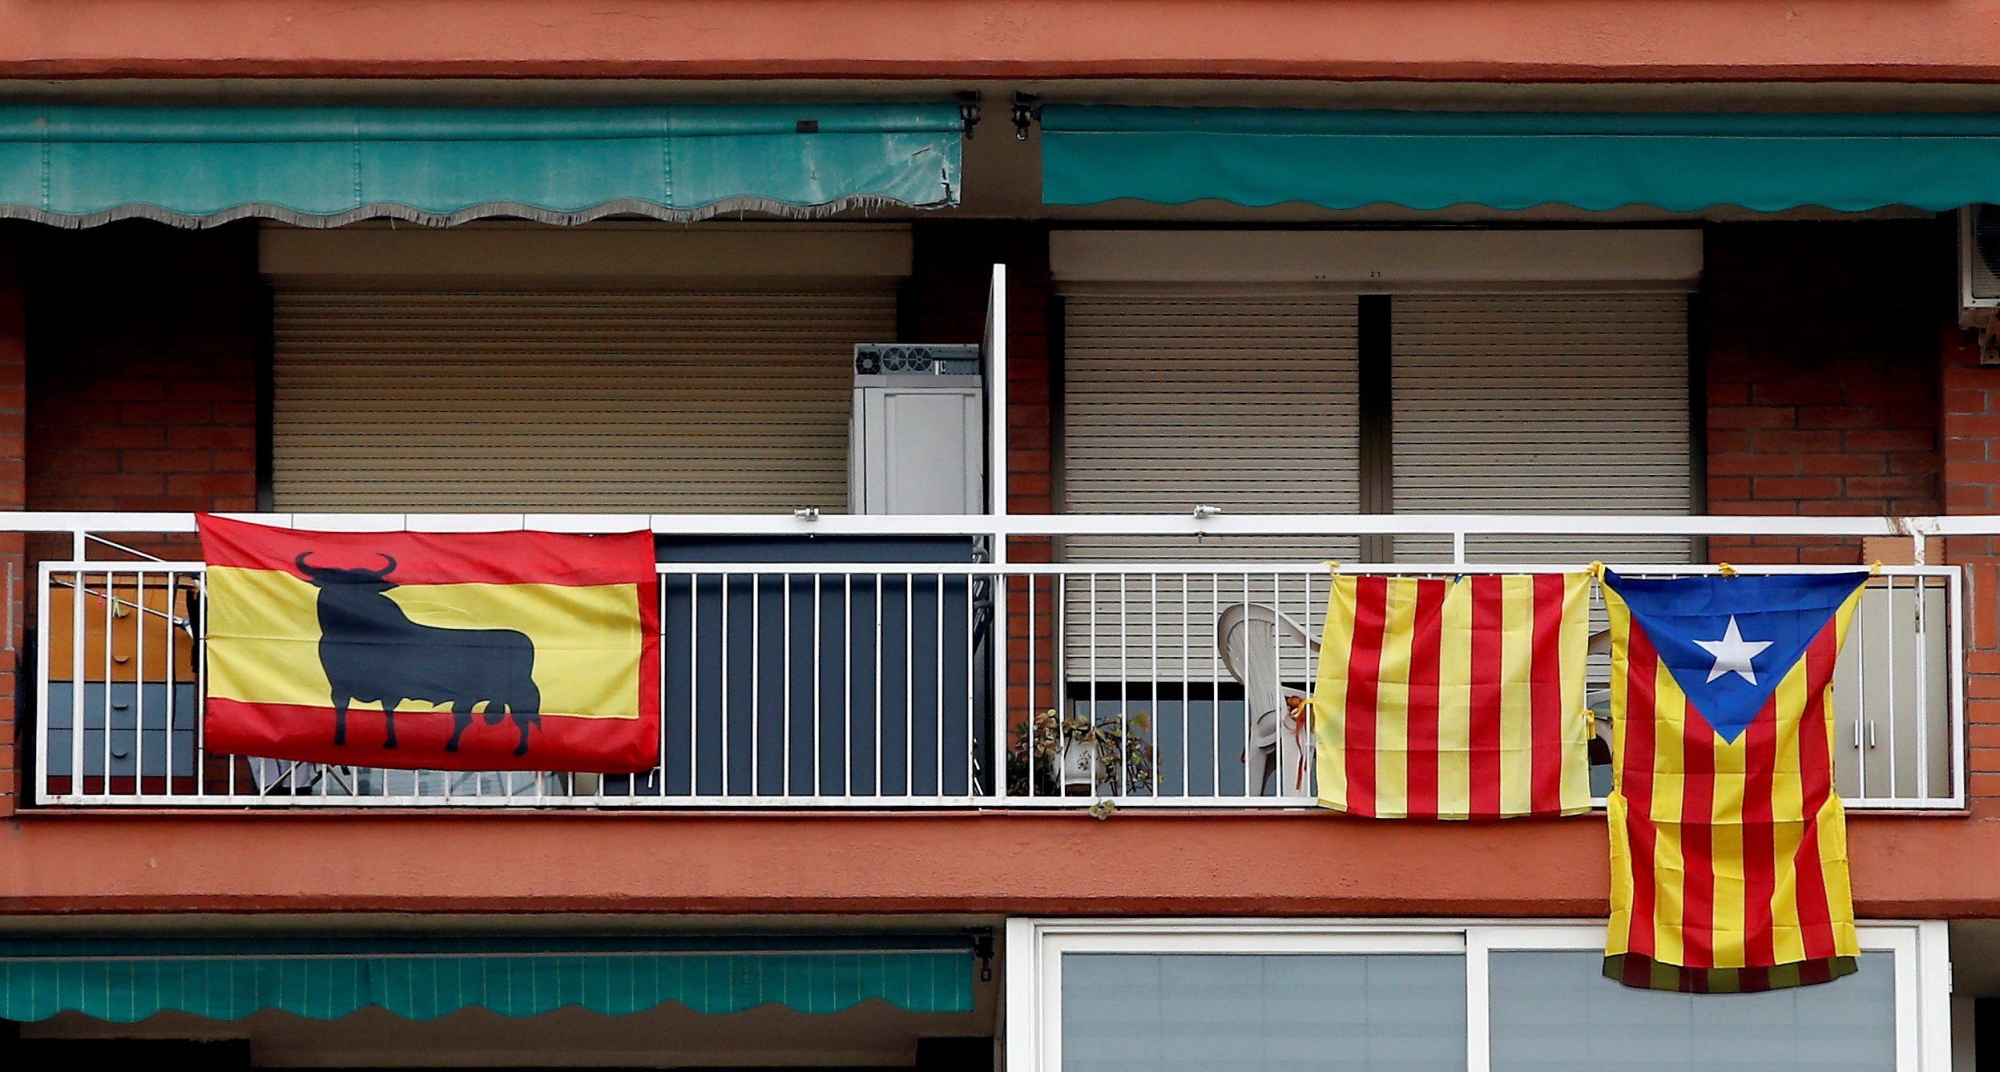 epa06399889 Spanish and Catalonian pro-independence flags hang from balconies in Badalona, Catalonia, northern Spain, 20 December 2017, a day before the Catalonian regional elections, scheduled for 21 December 2017. Regional elections in Catalonia will be held to elect all 135 seats in the Catalan regional parliament, as the Spanish central government applied article 155 of the Constitution following the regional parliament's unilateral declaration of independence.  EPA/ALBERTO ESTEVEZ SPAIN CATALONIA ELECTIONS